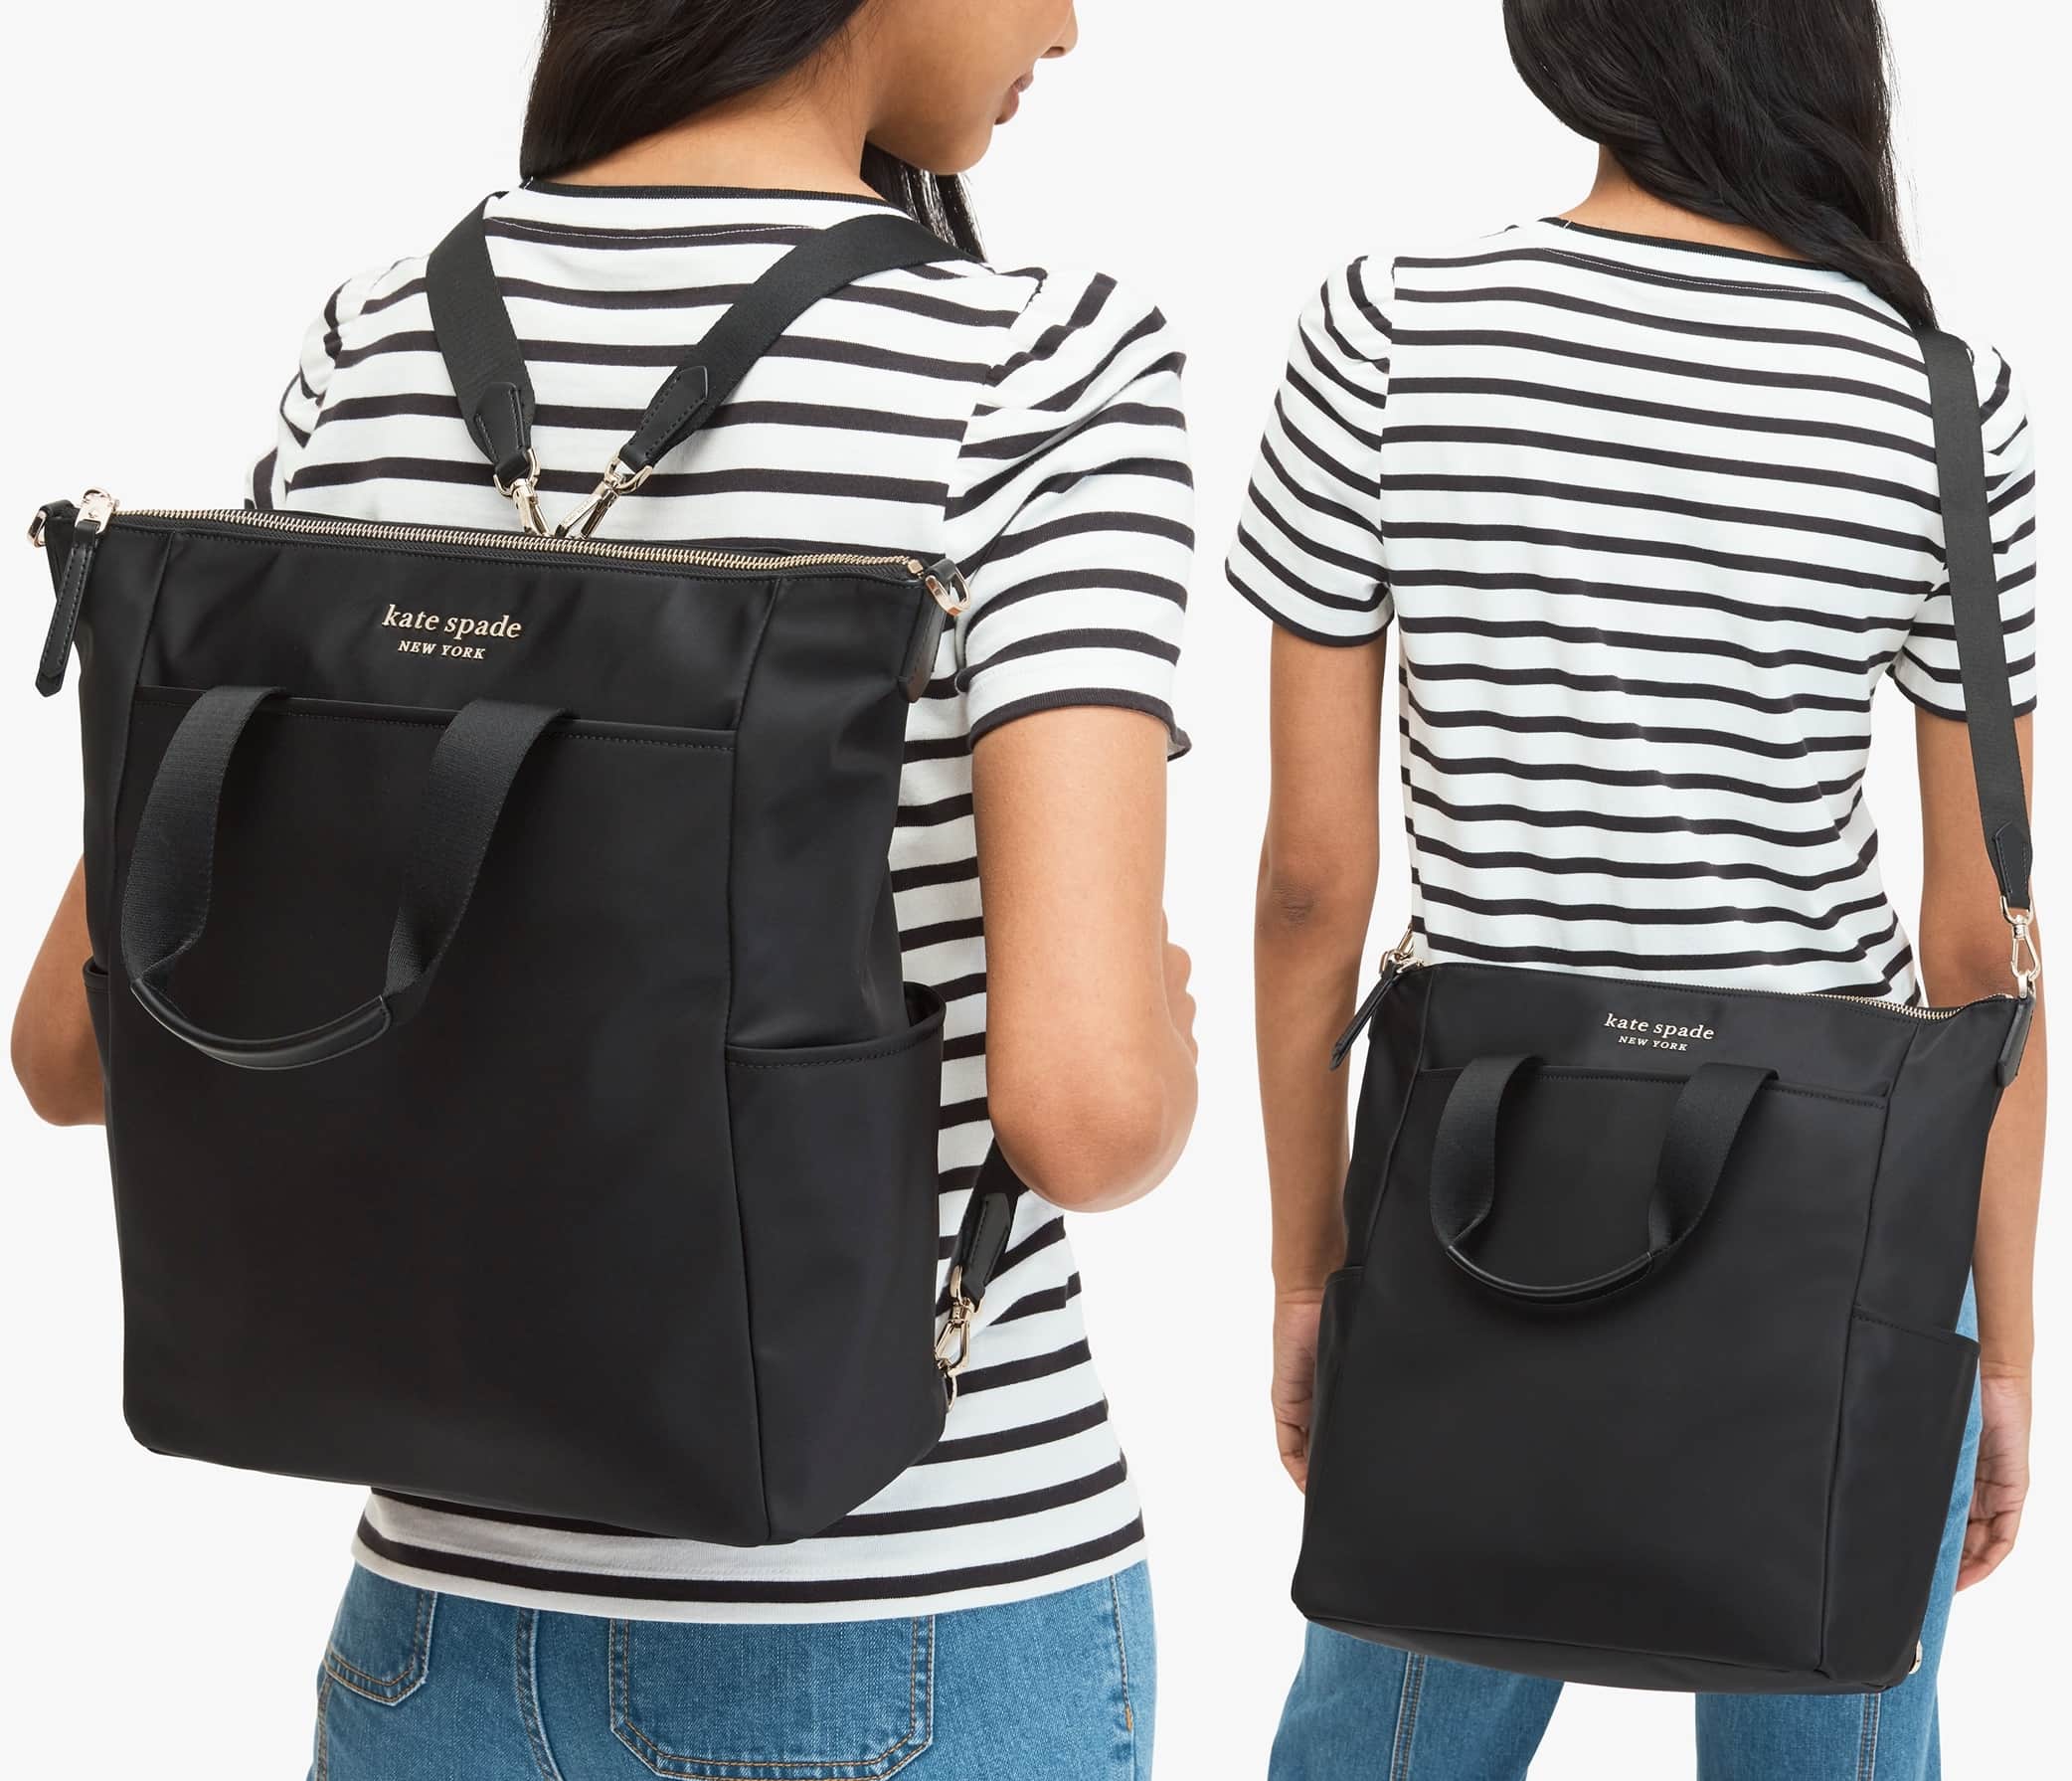 Gleaming hardware and smooth leather trim bring metropolitan-chic style to a glossy nylon backpack that easily converts to a sleek tote or crossbody bag